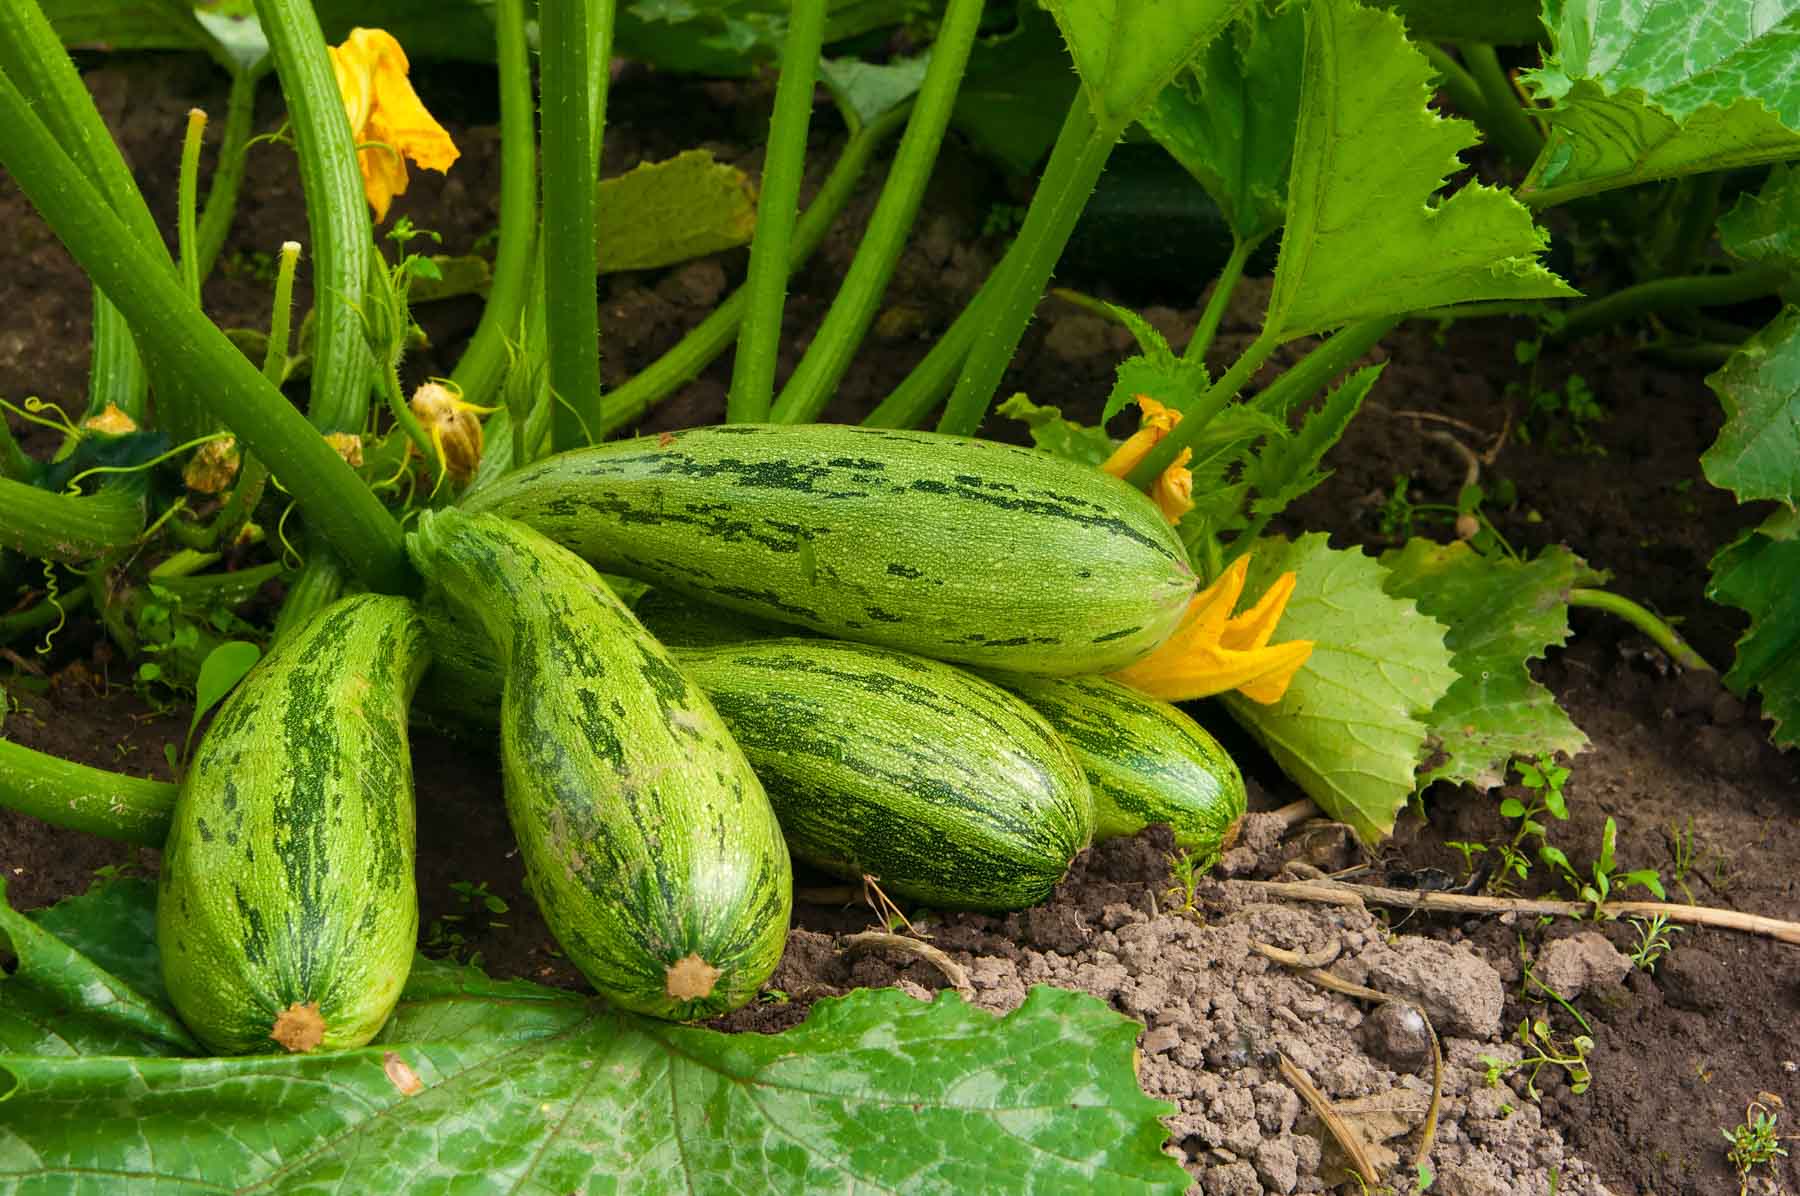 Image of Crookneck squash plant growing in a patio garden